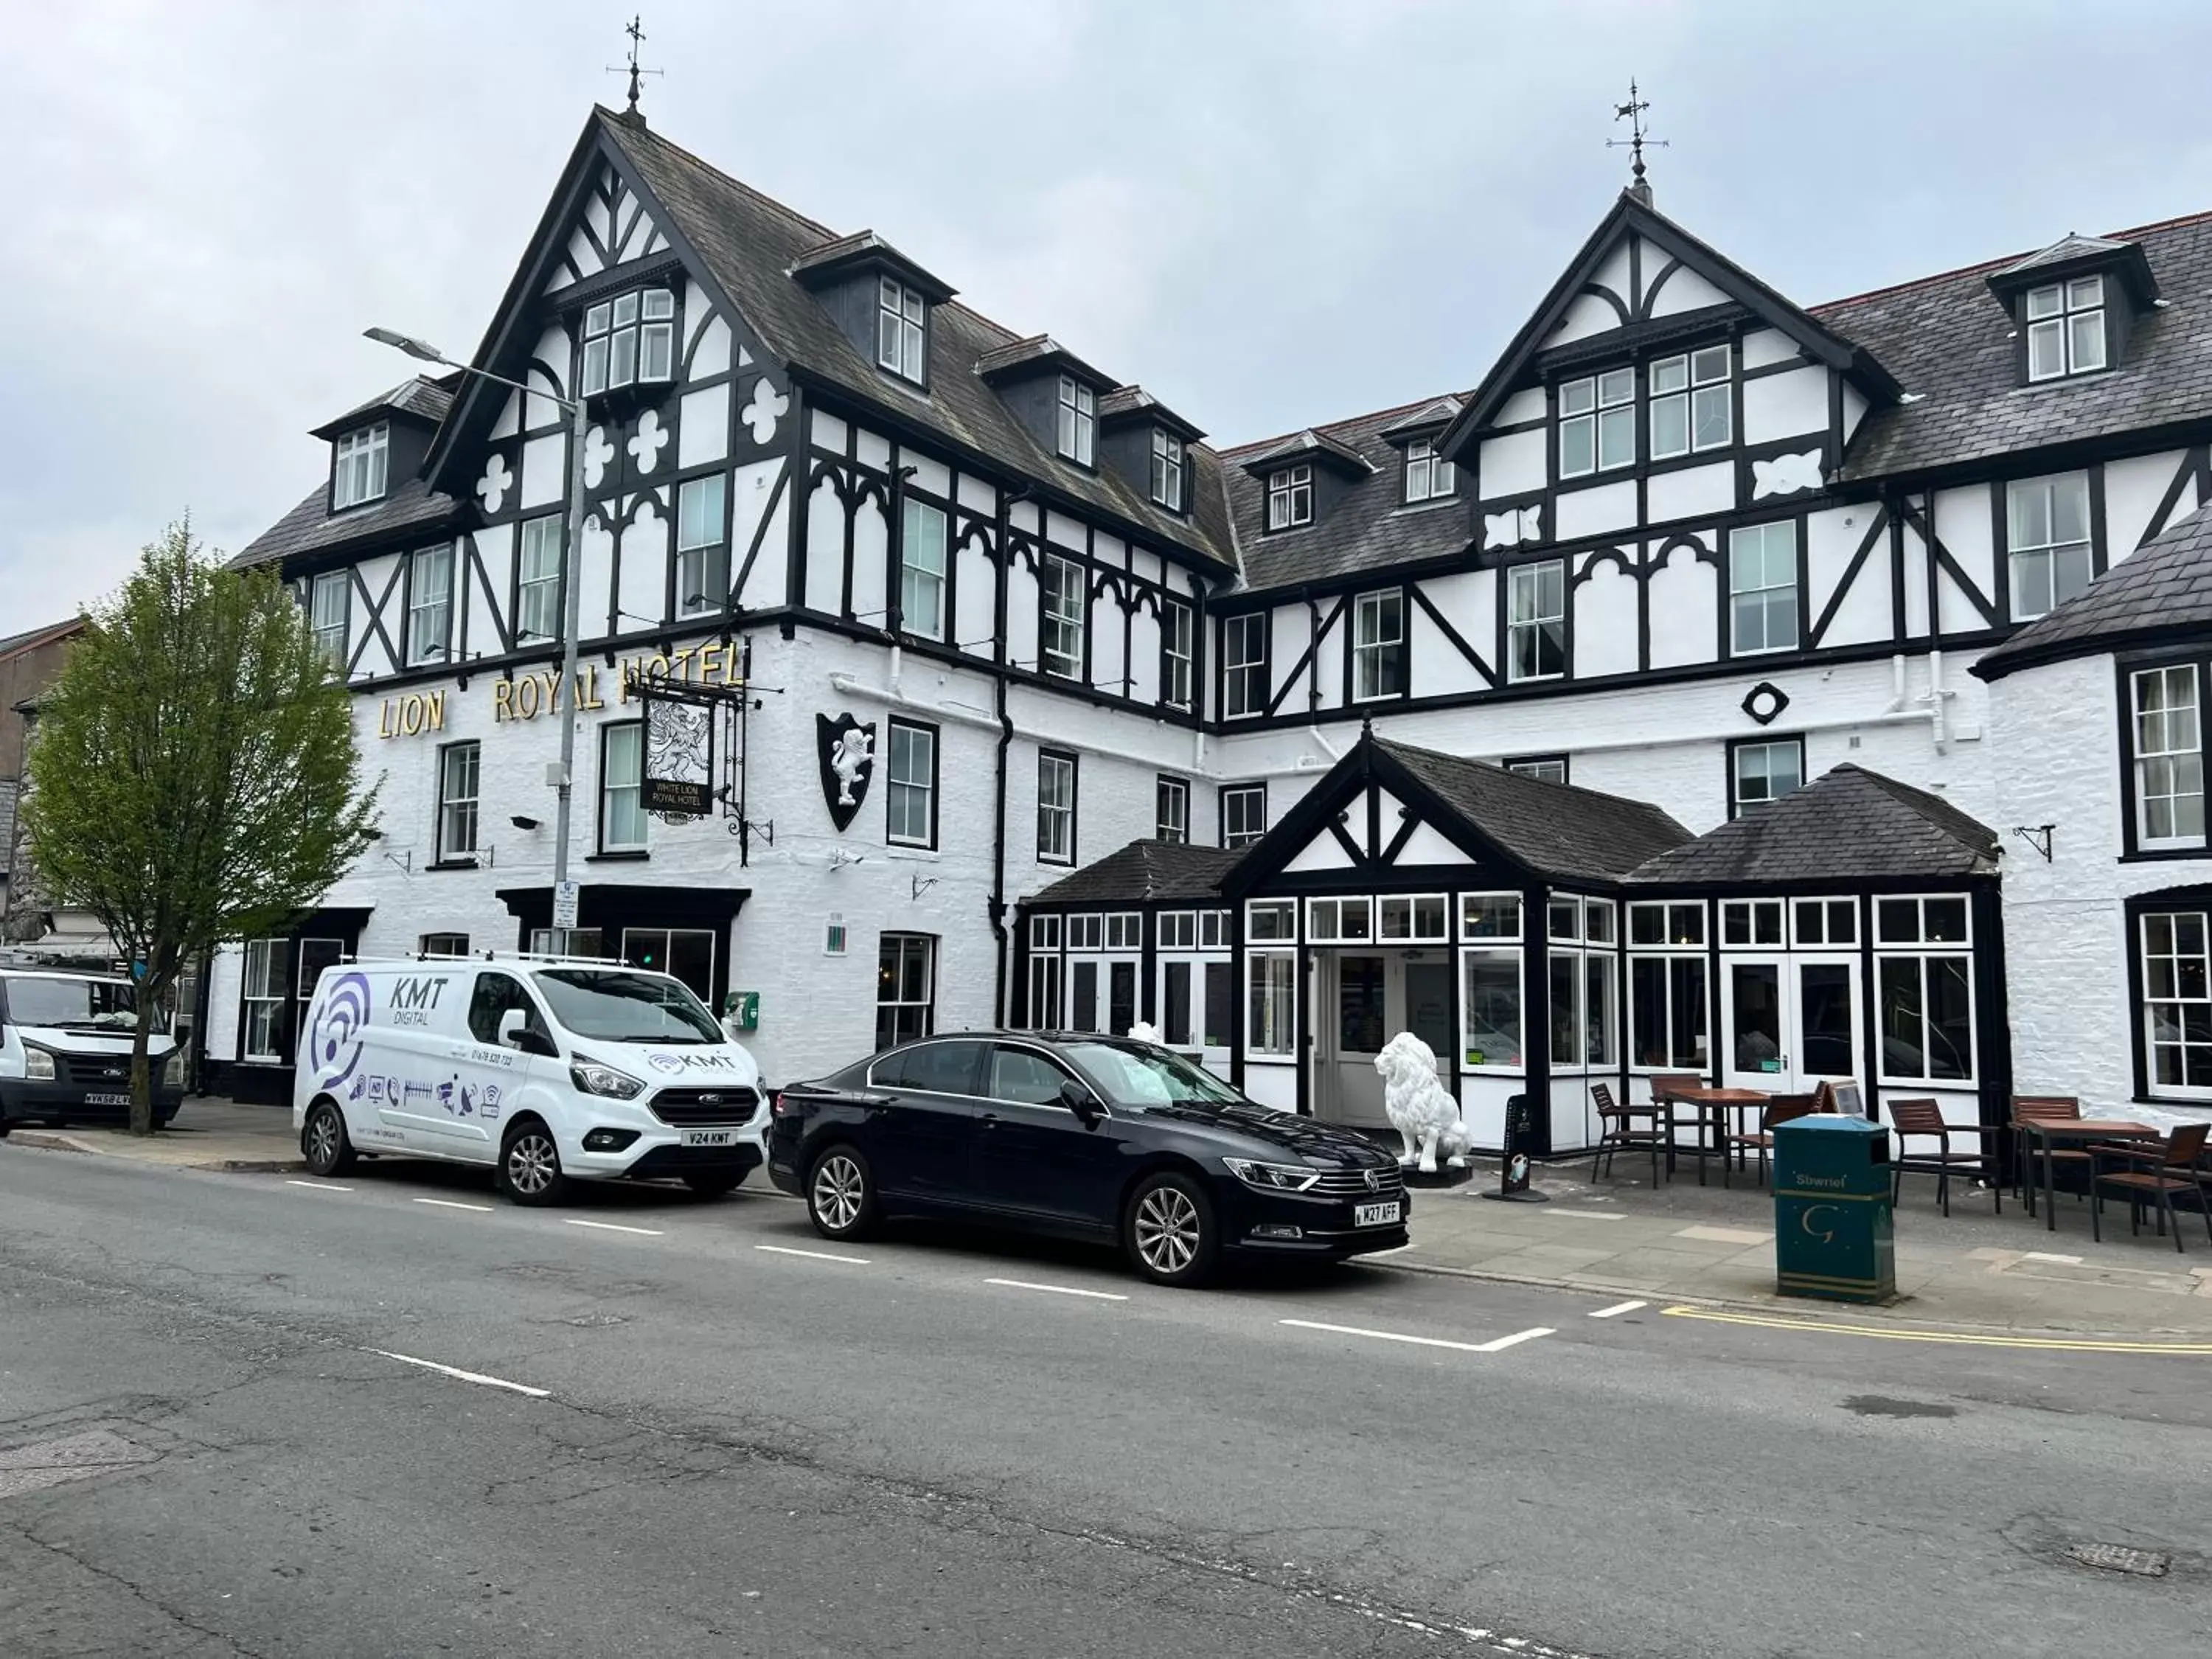 Property Building in White Lion Royal Hotel